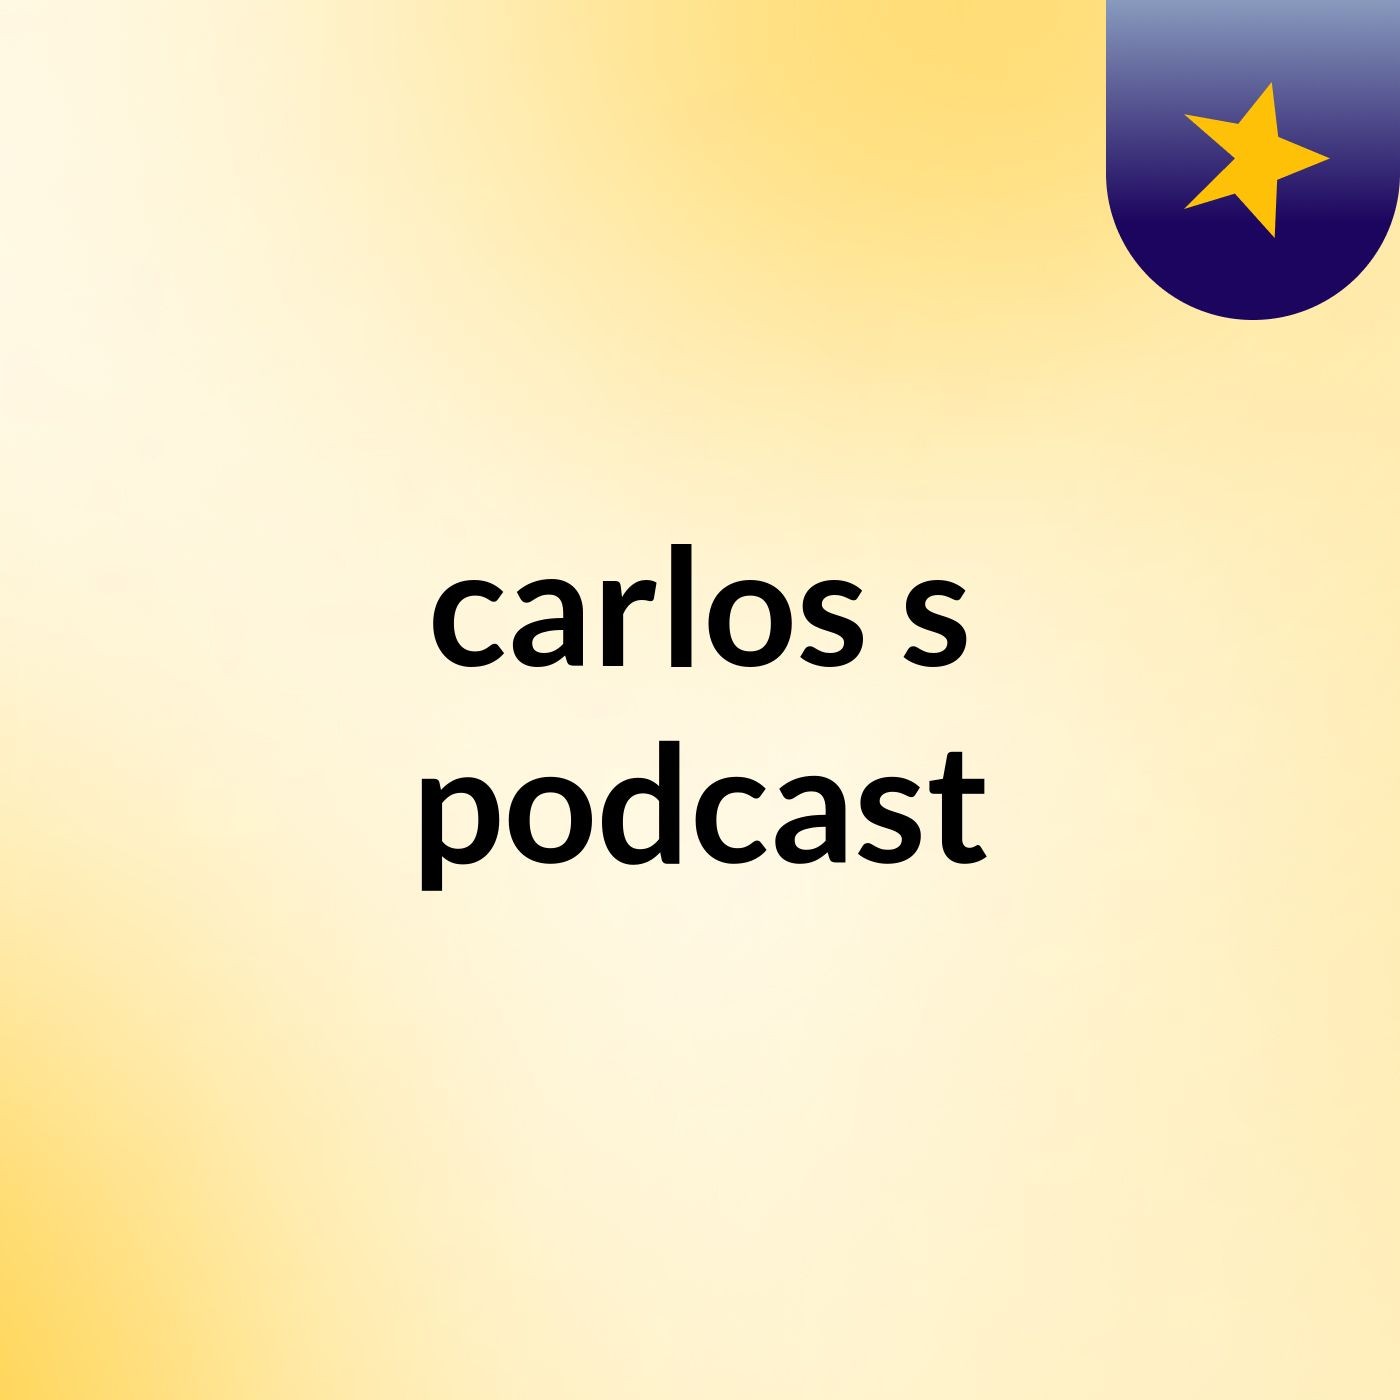 carlos's podcast